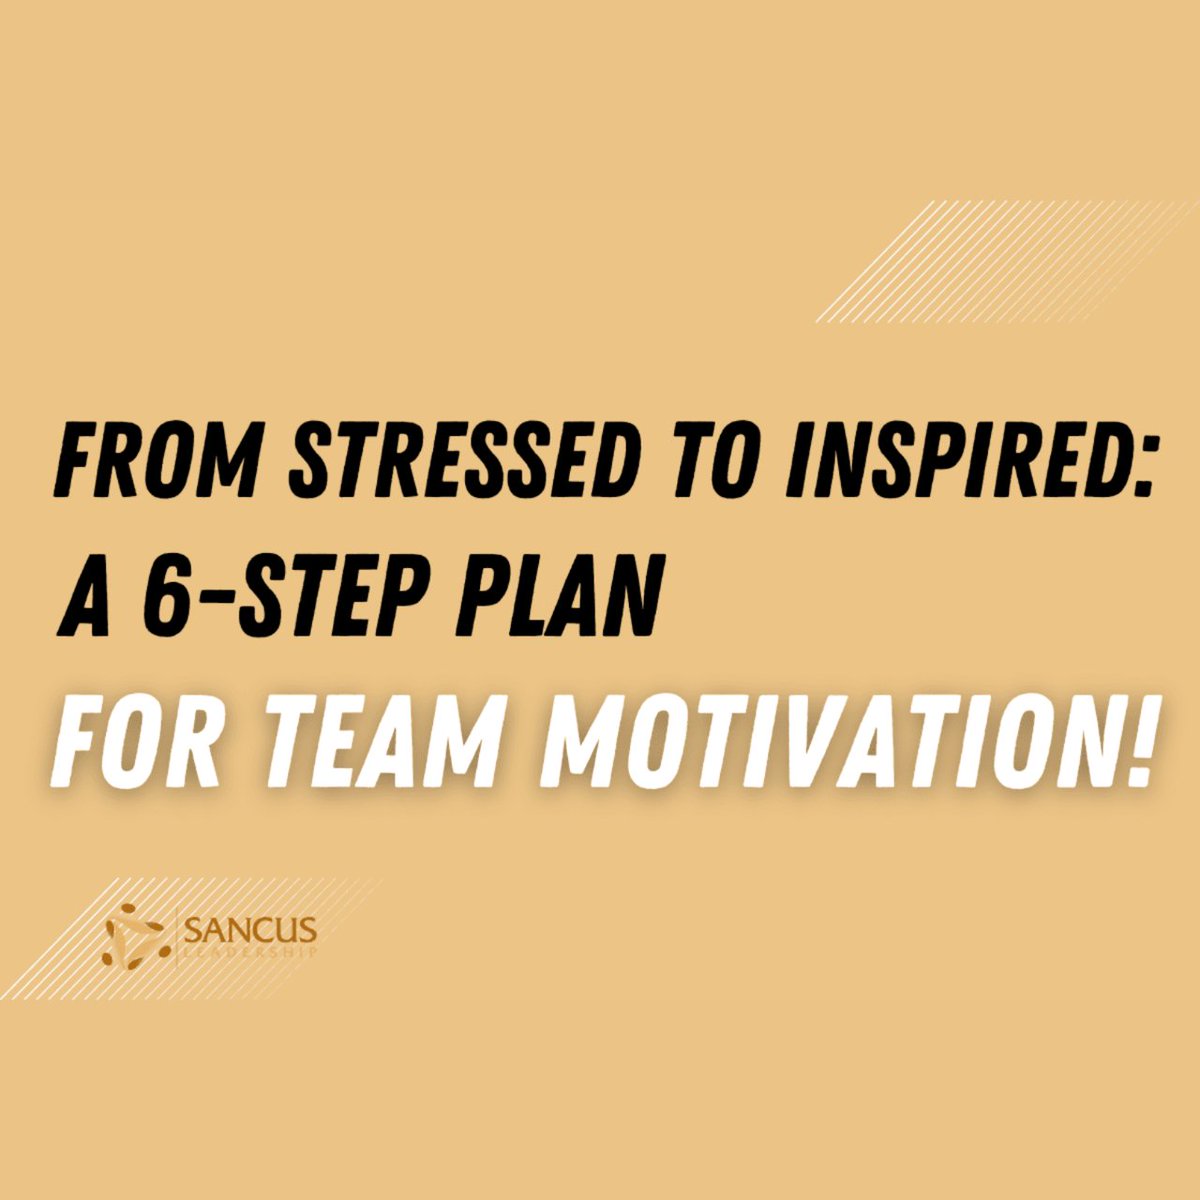 You can motivate your team in stressful situations by showing them why the suffering will be worth it, that you have their back, and how valuable their role on the team is.

sancusleadership.com/6-steps-to-mot…

#leadership #leadershiptips #smallteamleaders #smallteams #bealeader #newmanagers